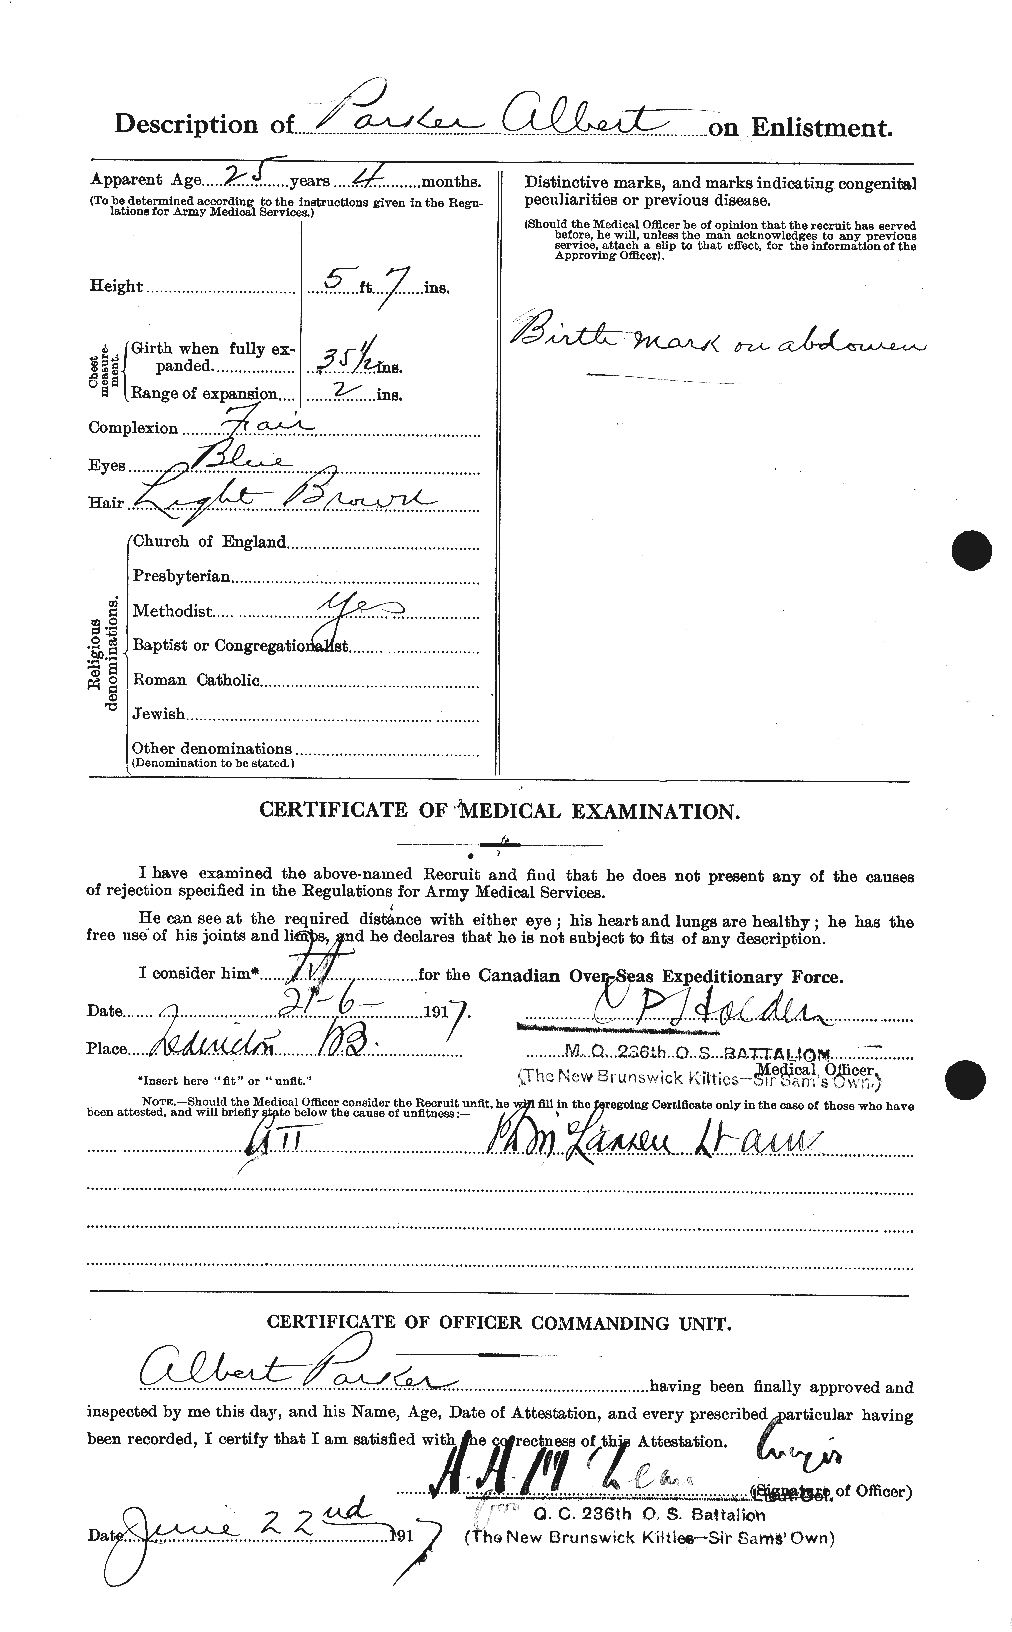 Personnel Records of the First World War - CEF 564962b